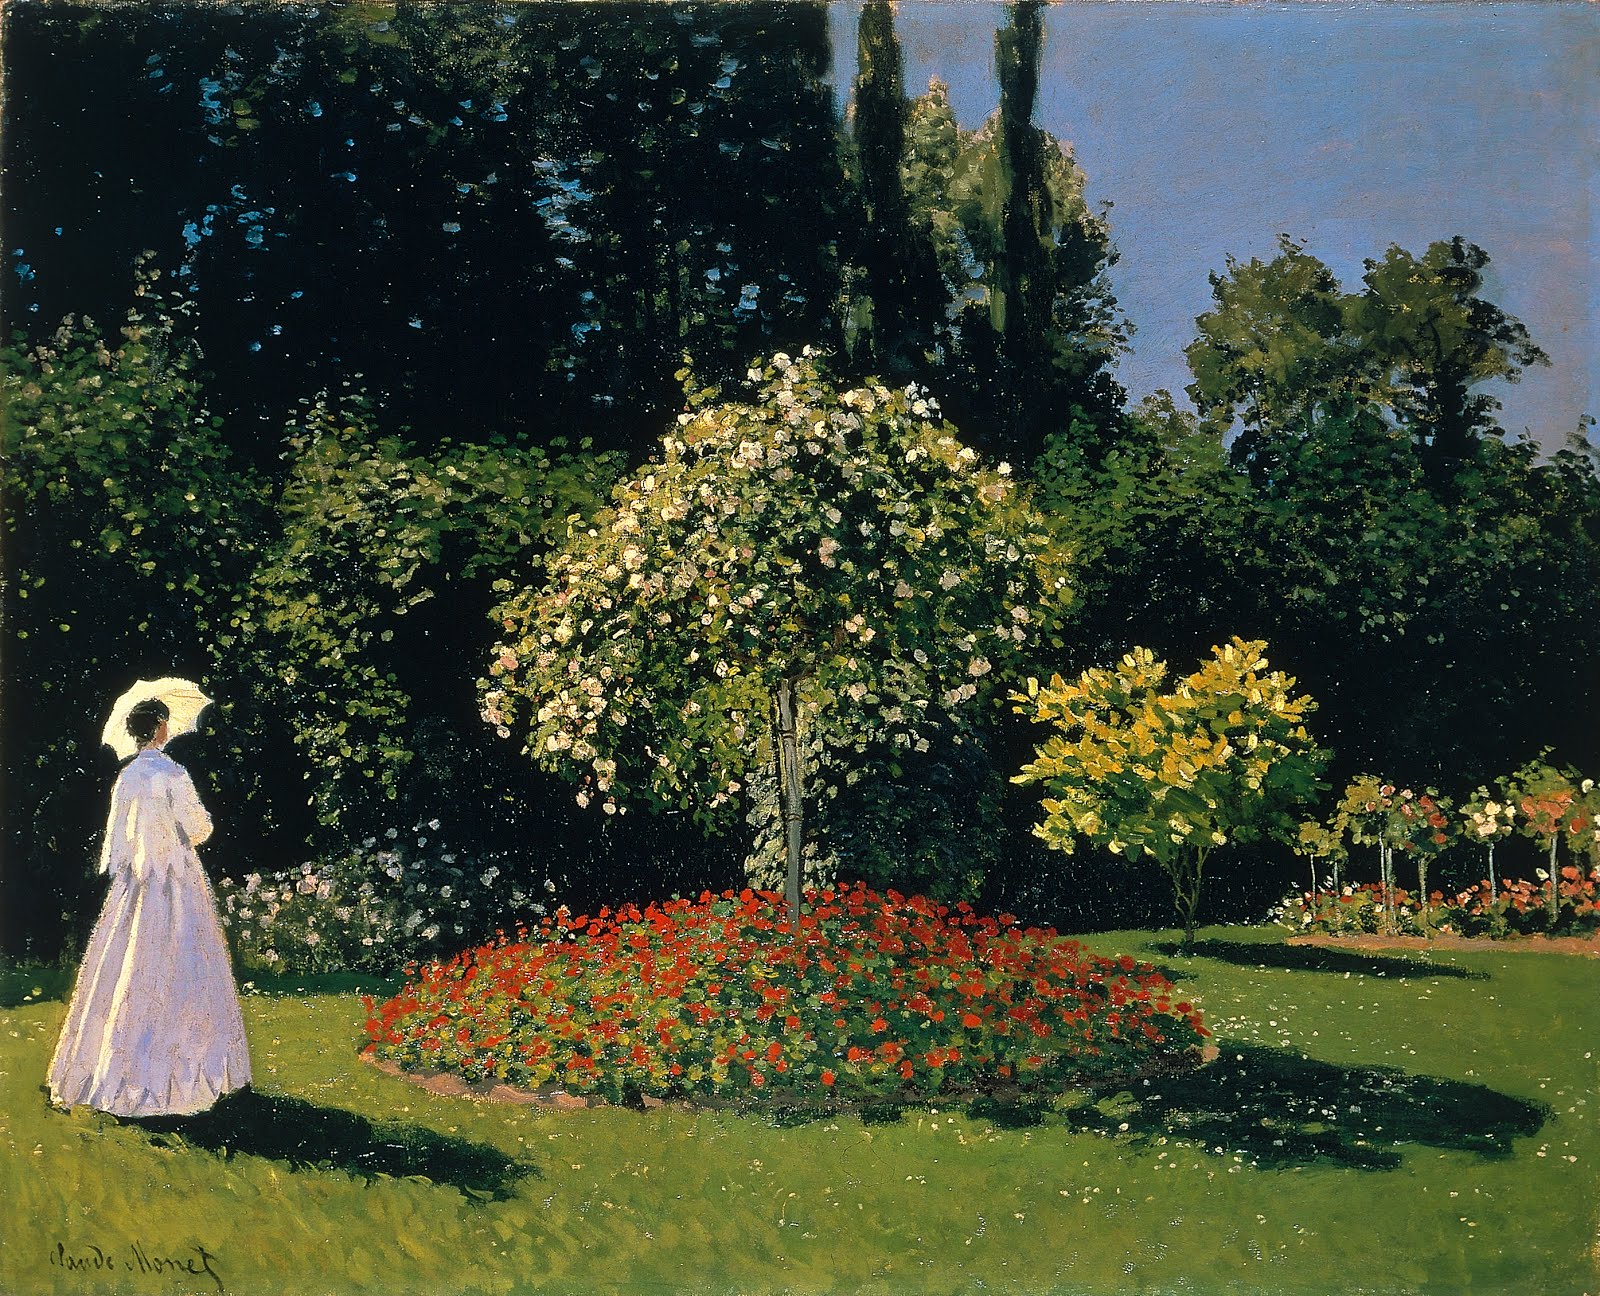 Monet, Poet of Light and